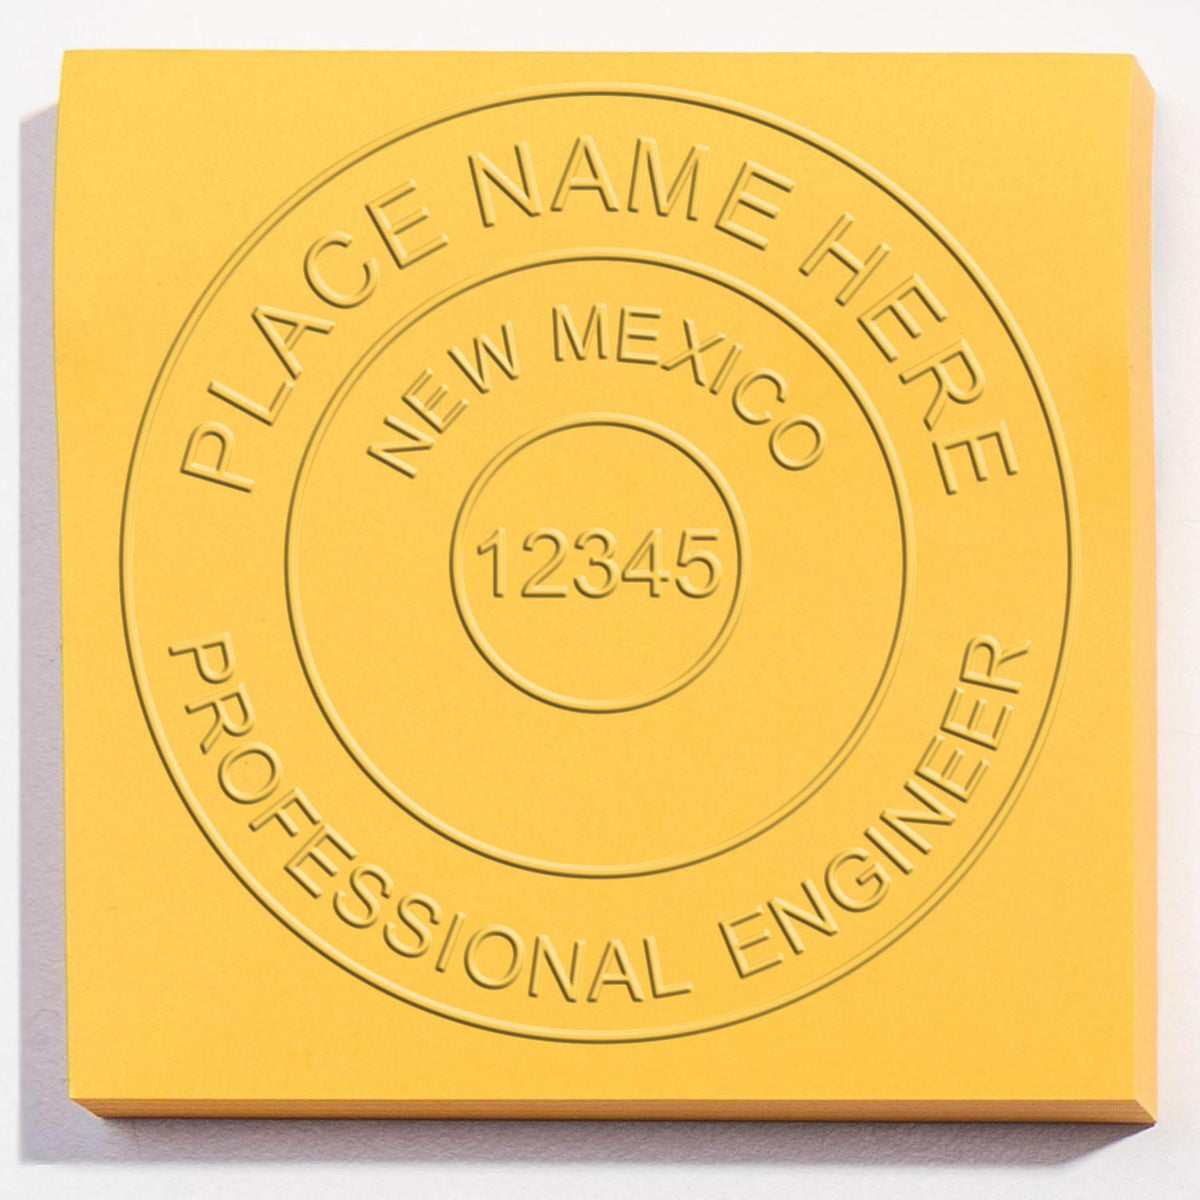 A photograph of the New Mexico Engineer Desk Seal stamp impression reveals a vivid, professional image of the on paper.